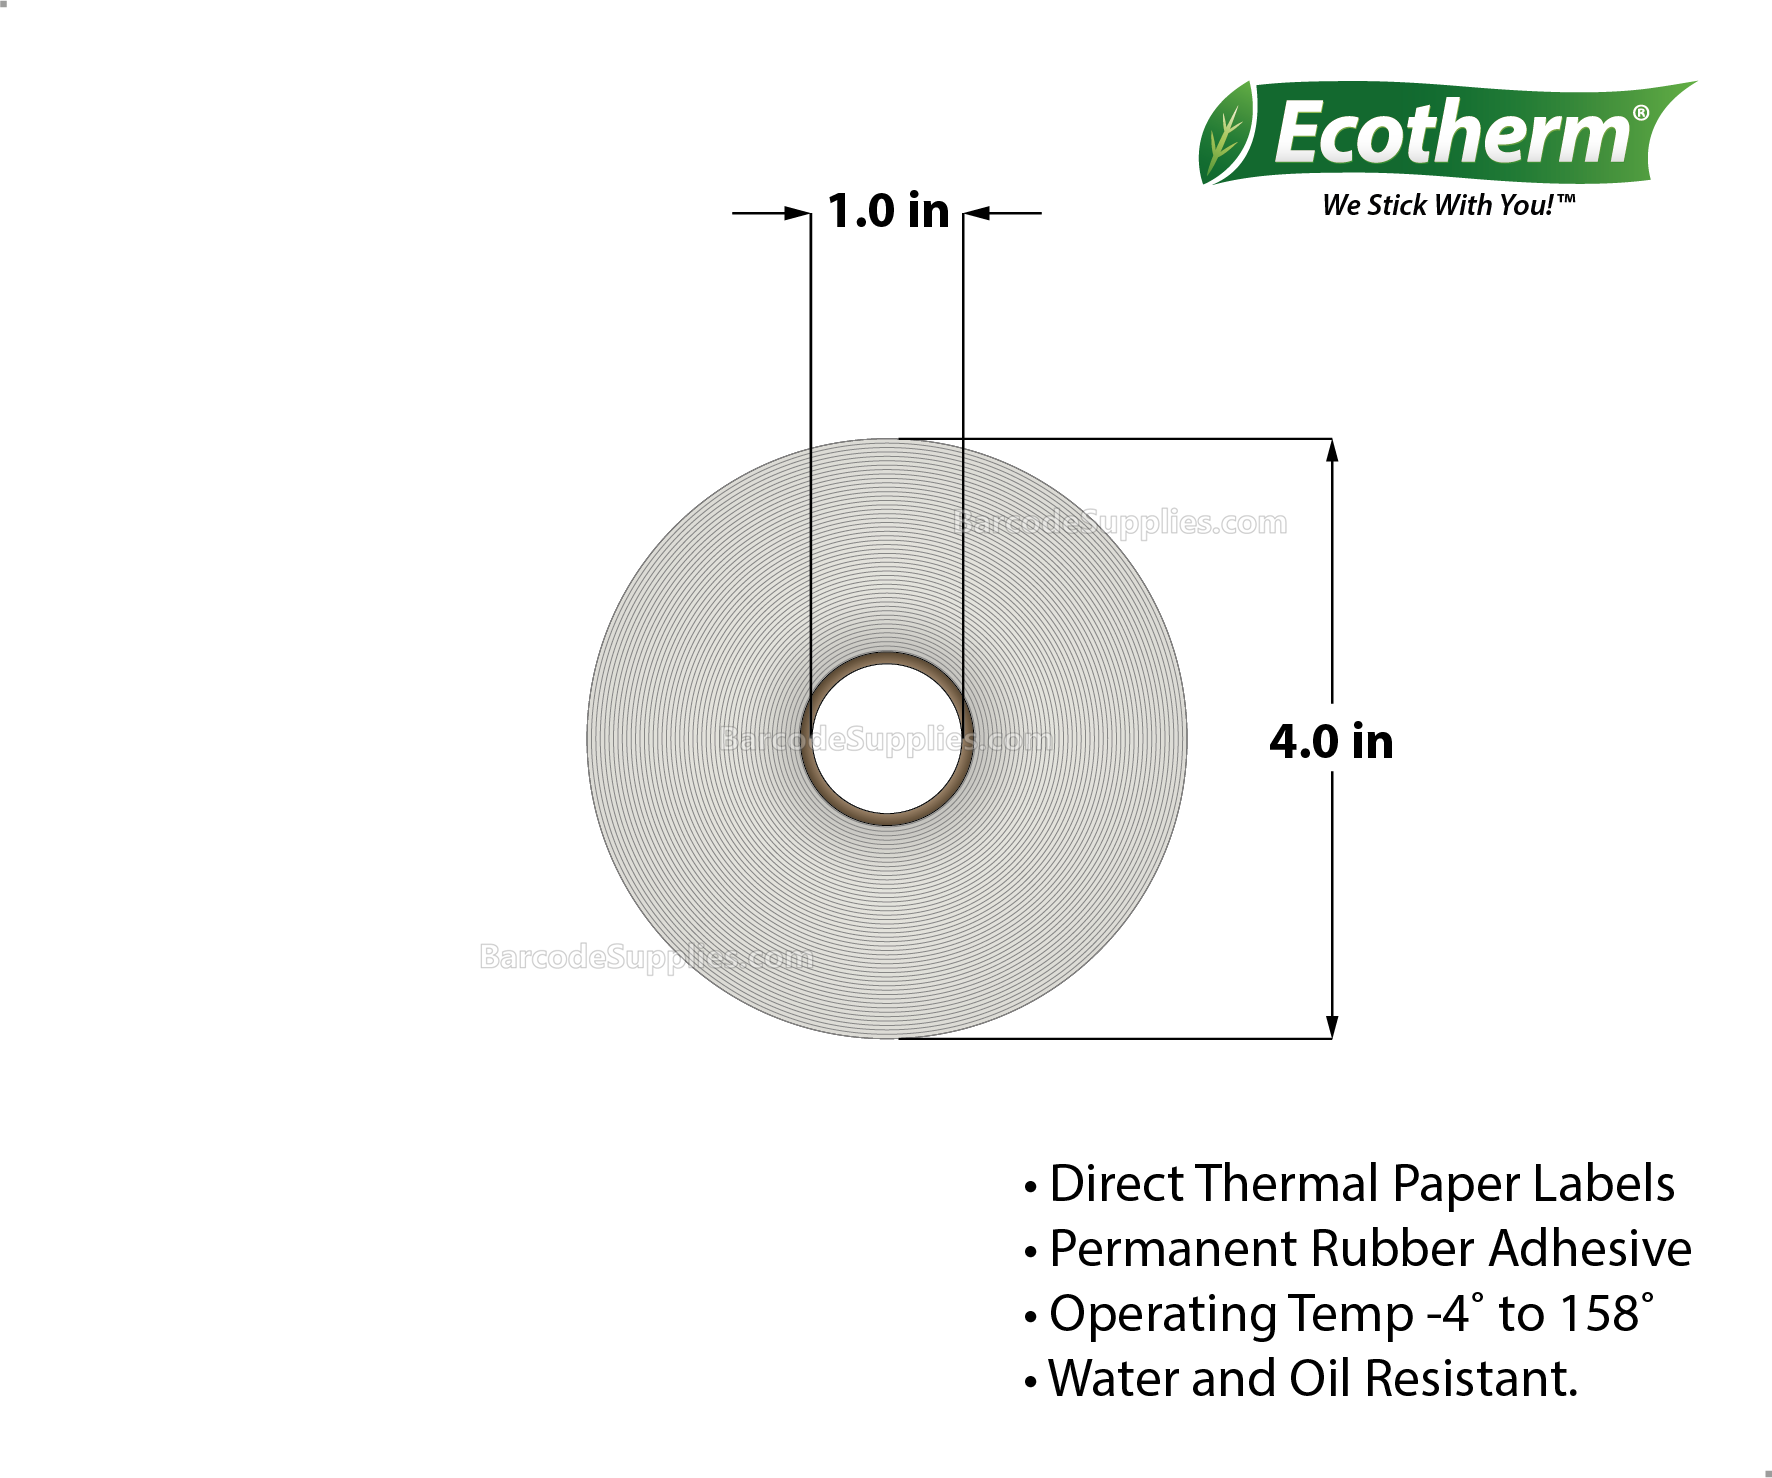 Products 2 x 1.5 Direct Thermal White Labels With Rubber Adhesive - Perforated - 1320 Labels Per Roll - Carton Of 4 Rolls - 5280 Labels Total - MPN: ECOTHERM14133-4